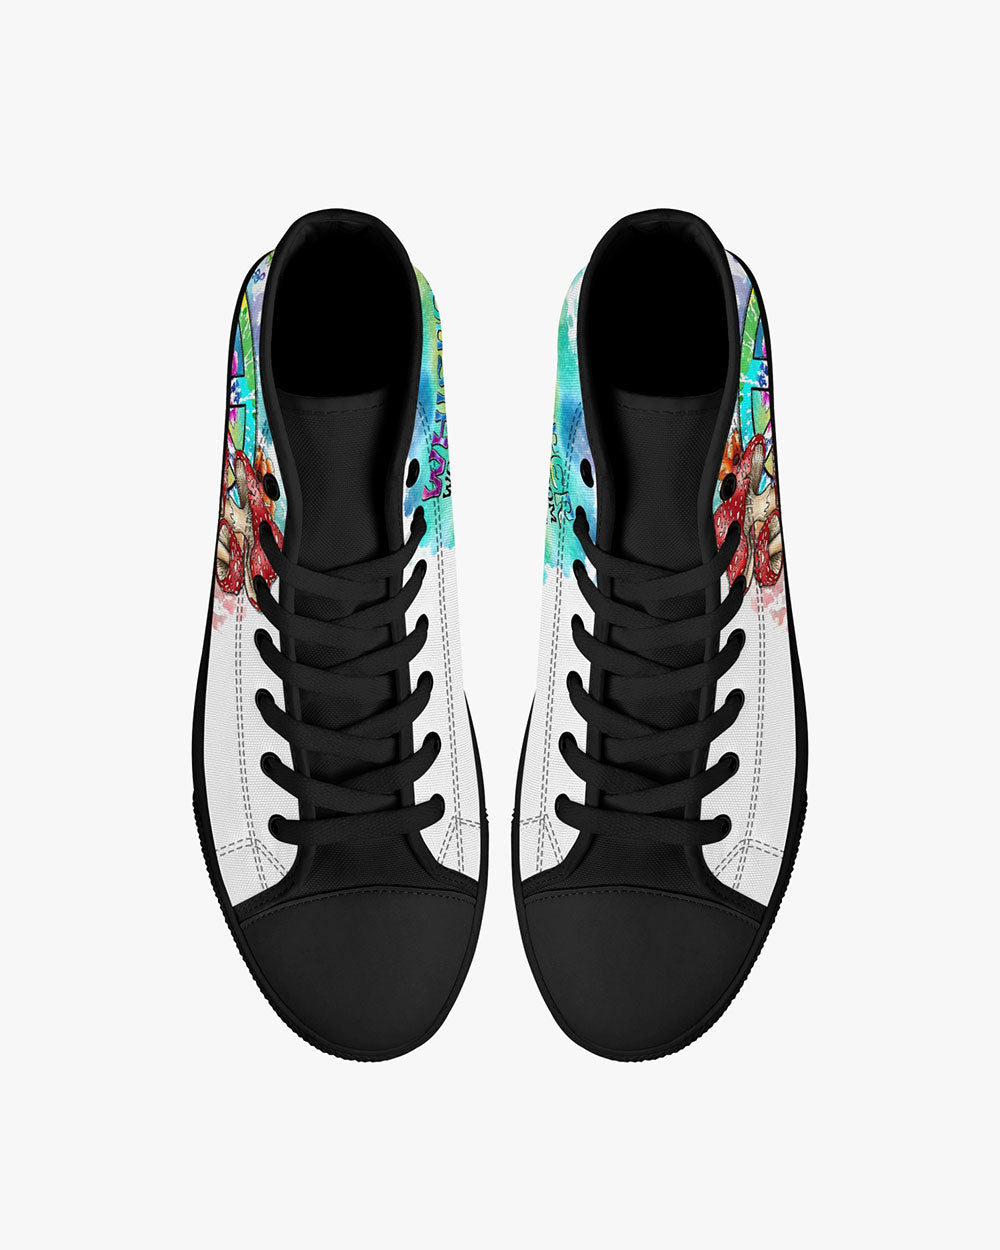 WHISPER WORDS OF WISDOM LEOPARD GUITAR HIGH TOP CANVAS SHOES - TL1602232